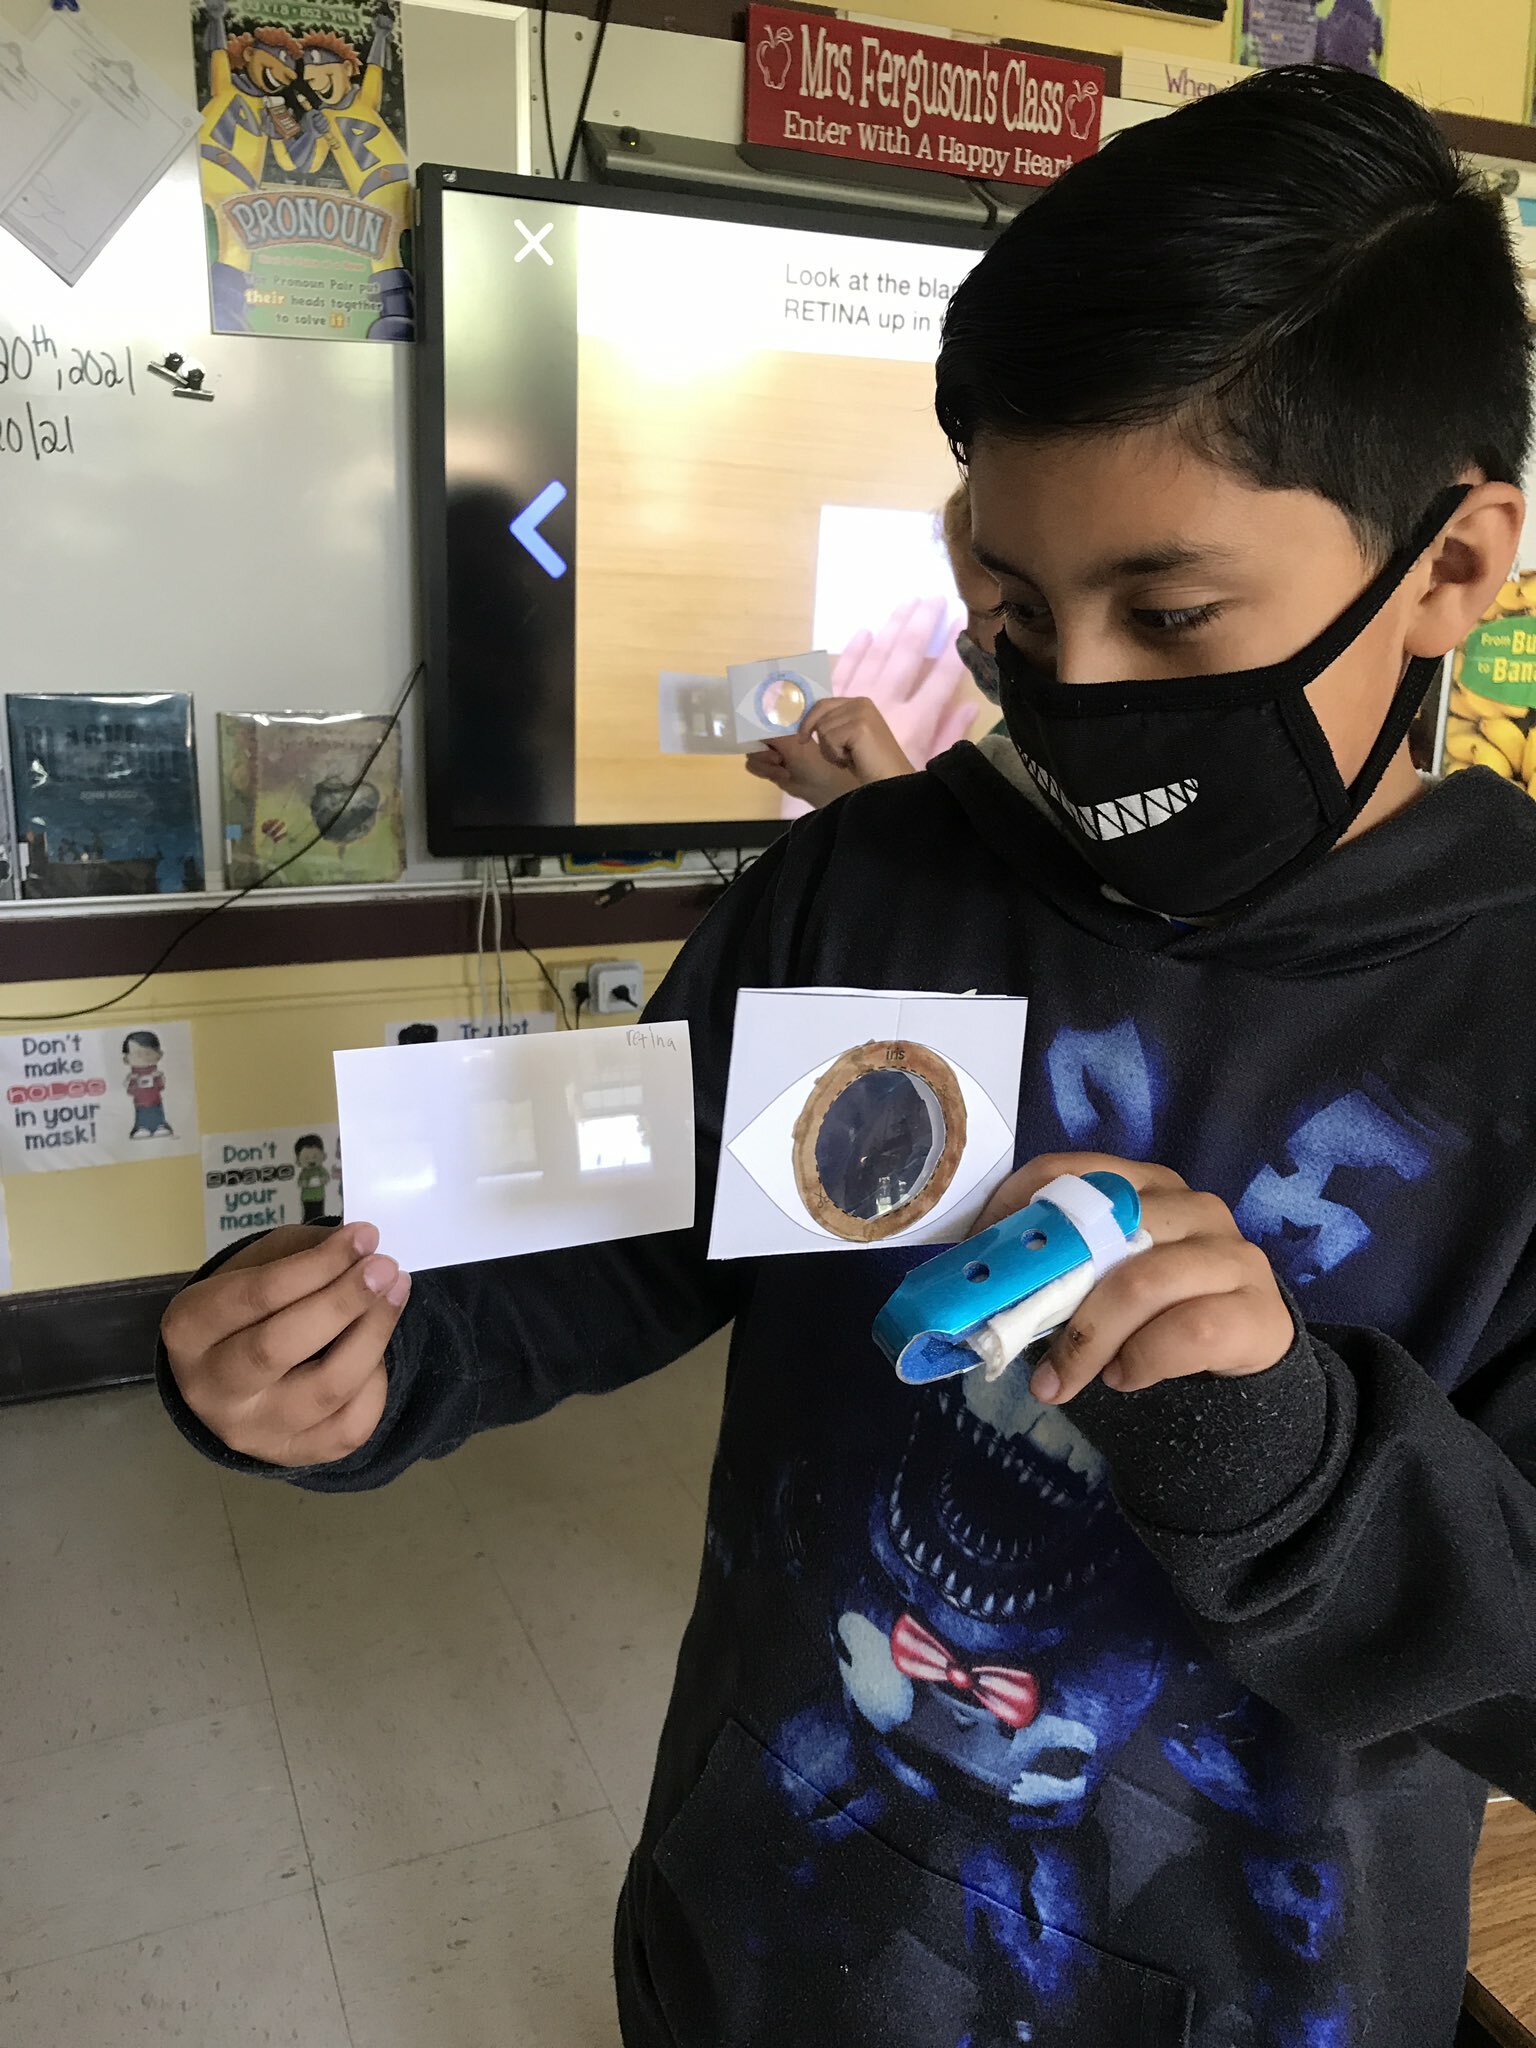 Hampton Bays Elementary School fourth graders explored how eyes work through a science, technology, engineering and math lesson. As part of the STEM unit, the students created model lenses and retinas. They were amazed that they were able to see images refracted from their models.